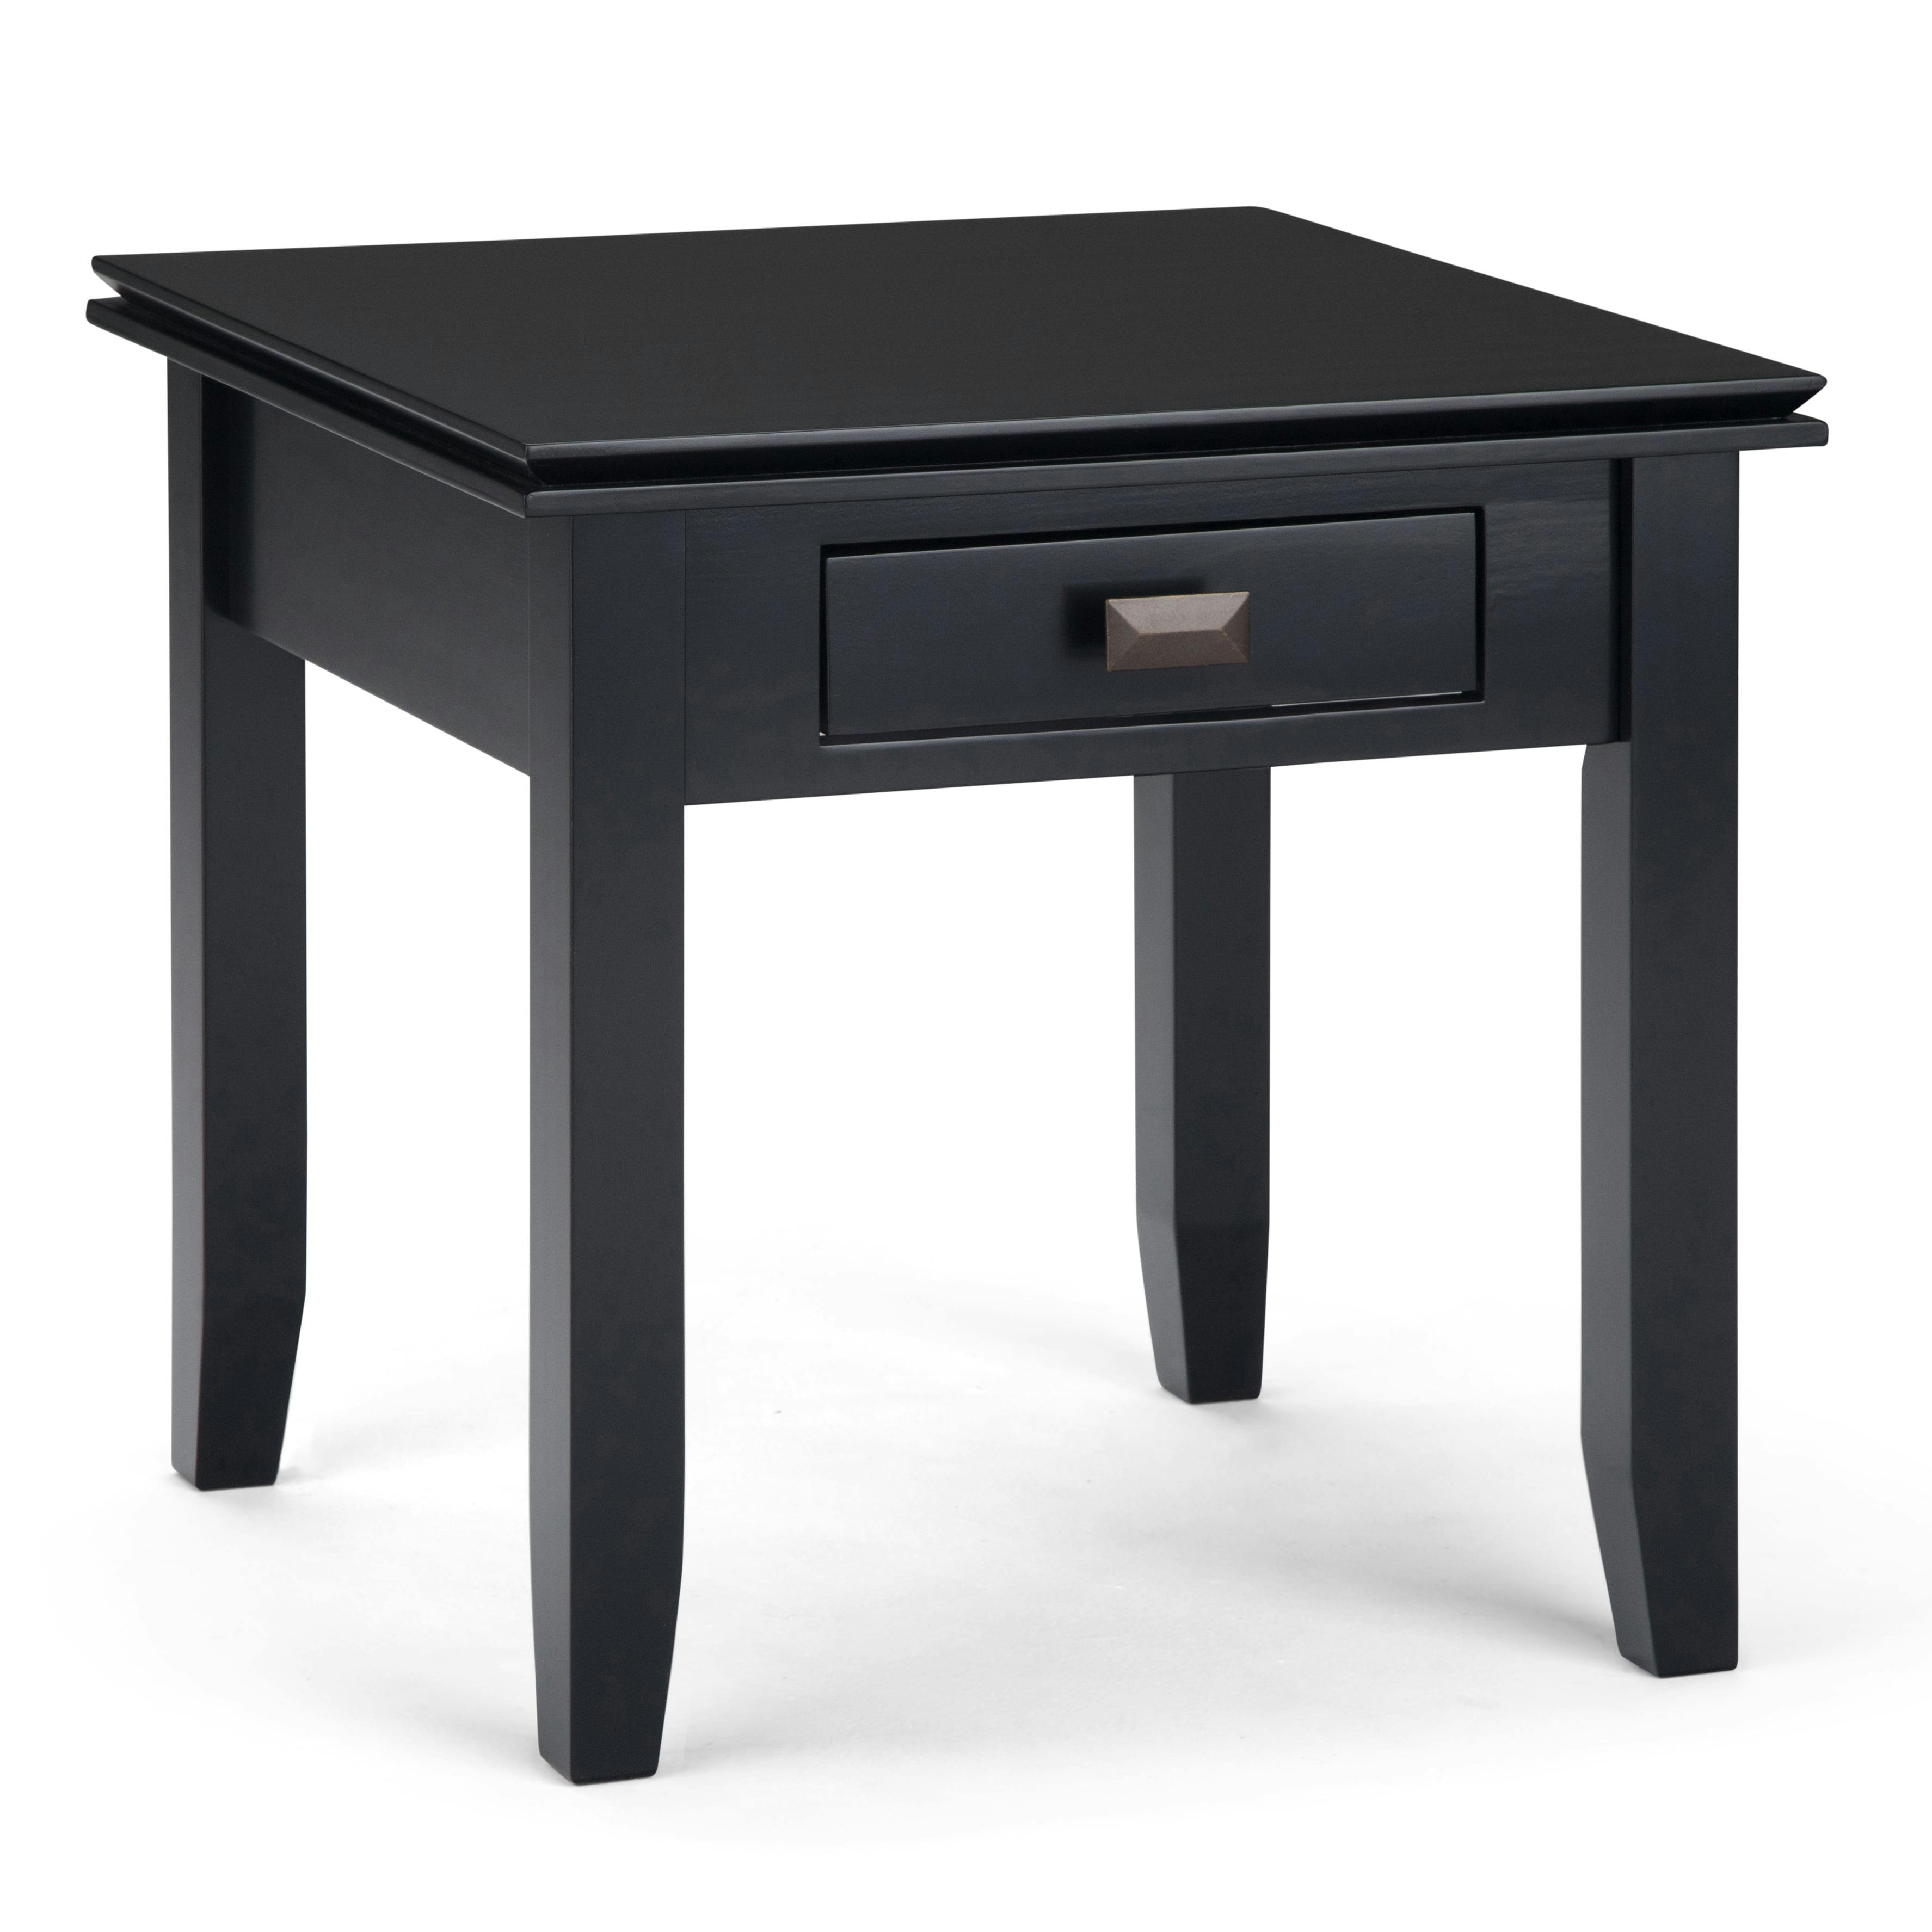 Artisan Square Black Solid Wood Side Table with Storage